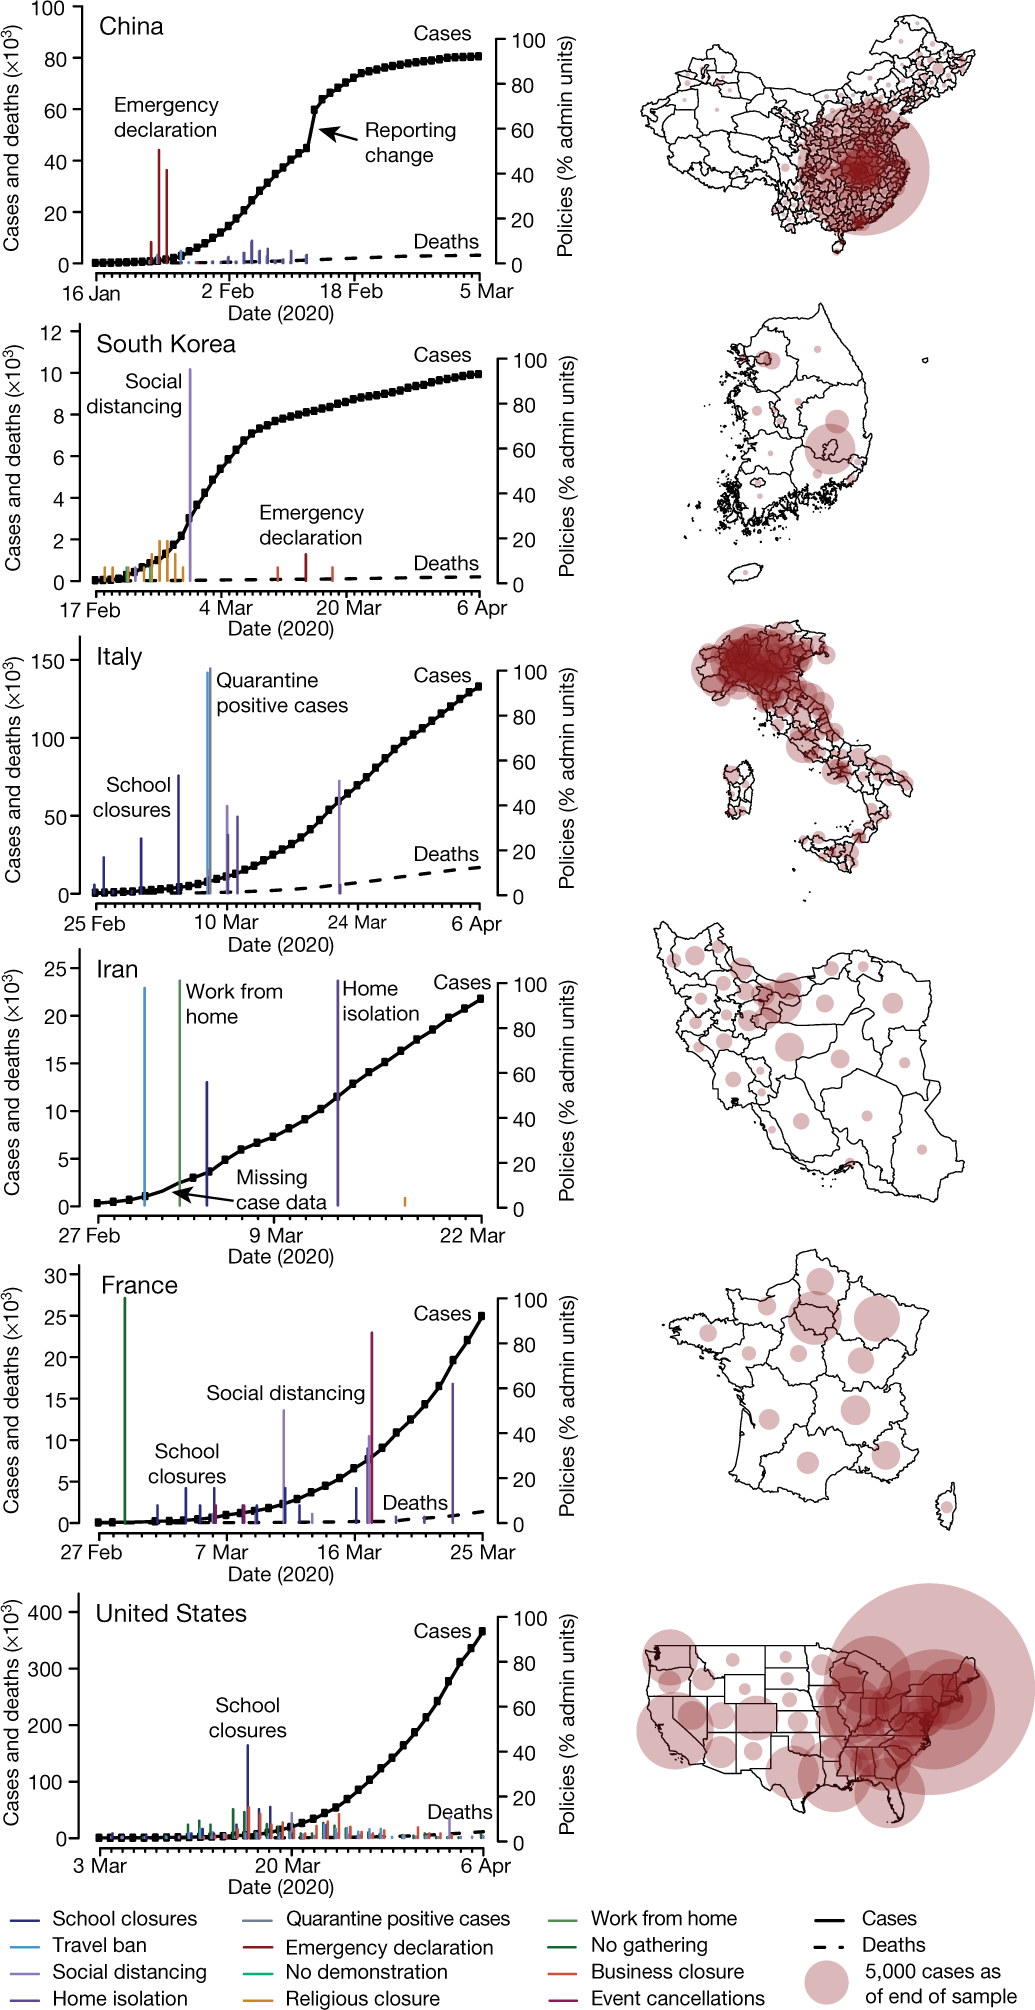 The effect of large-scale anti-contagion policies on the COVID-19 pandemic